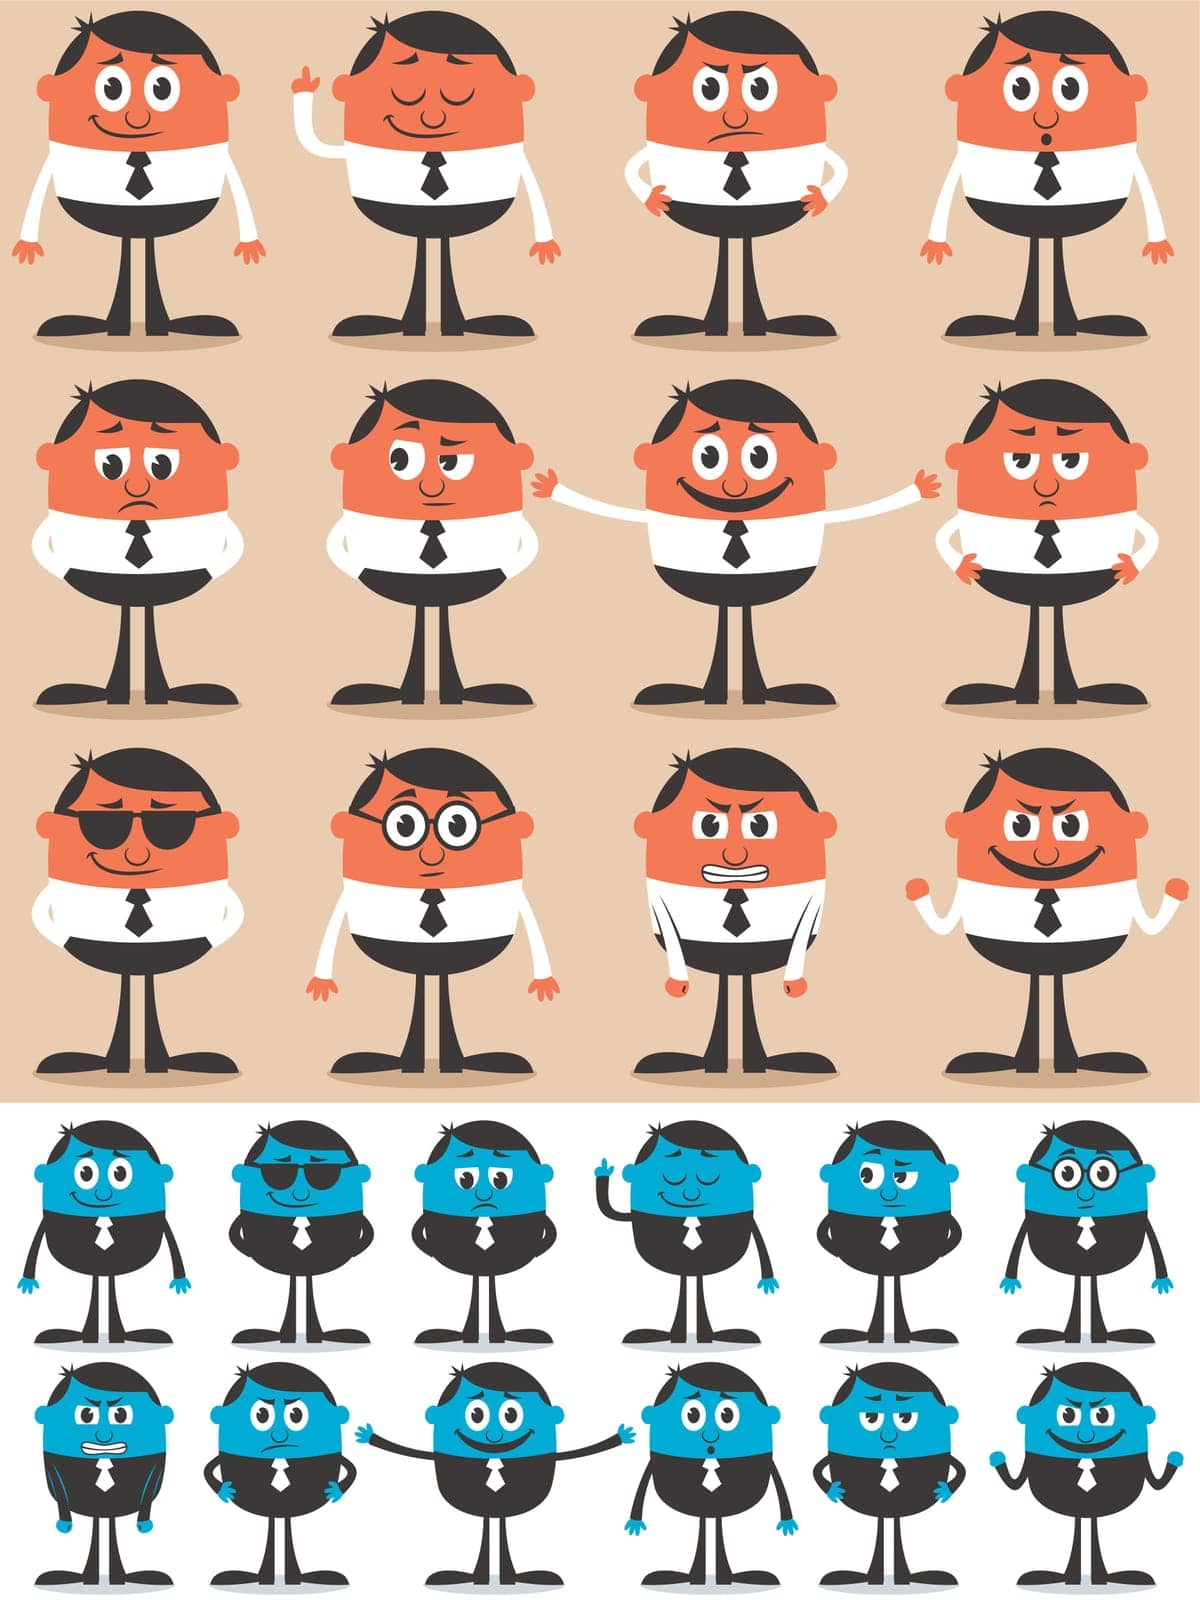 Retro businessman character in 12 different emotions, each in 2 versions. 